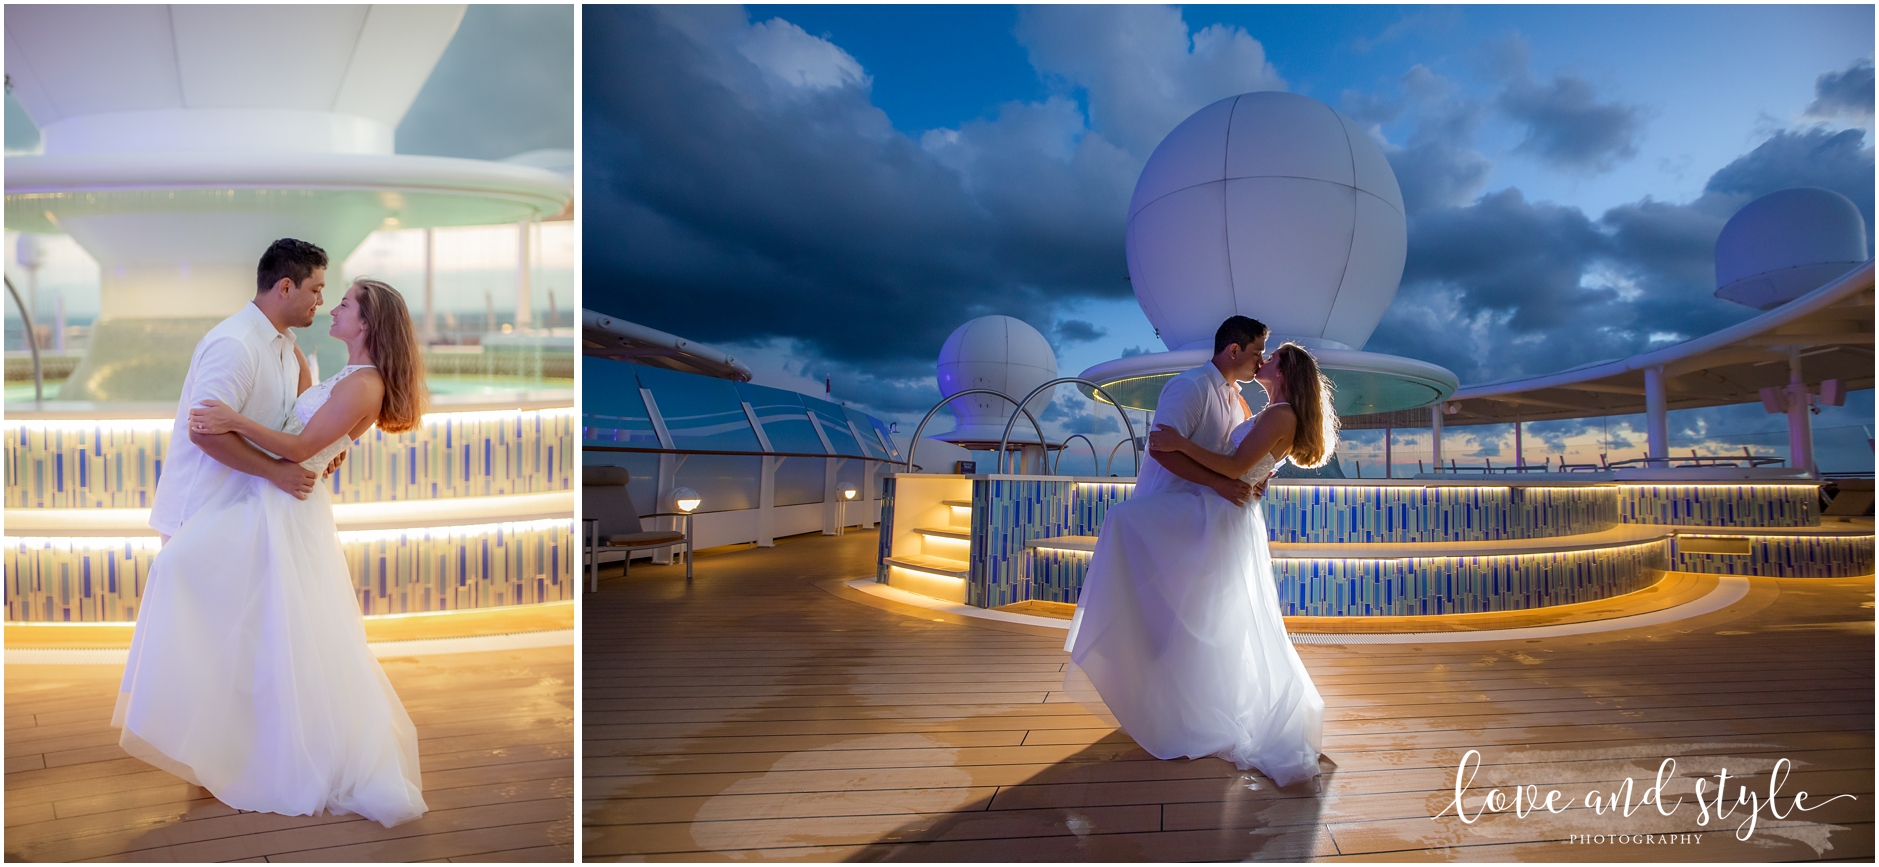 Disney Cruise Wedding bride and groom portrait on the deck at sunset on the Disney Dream